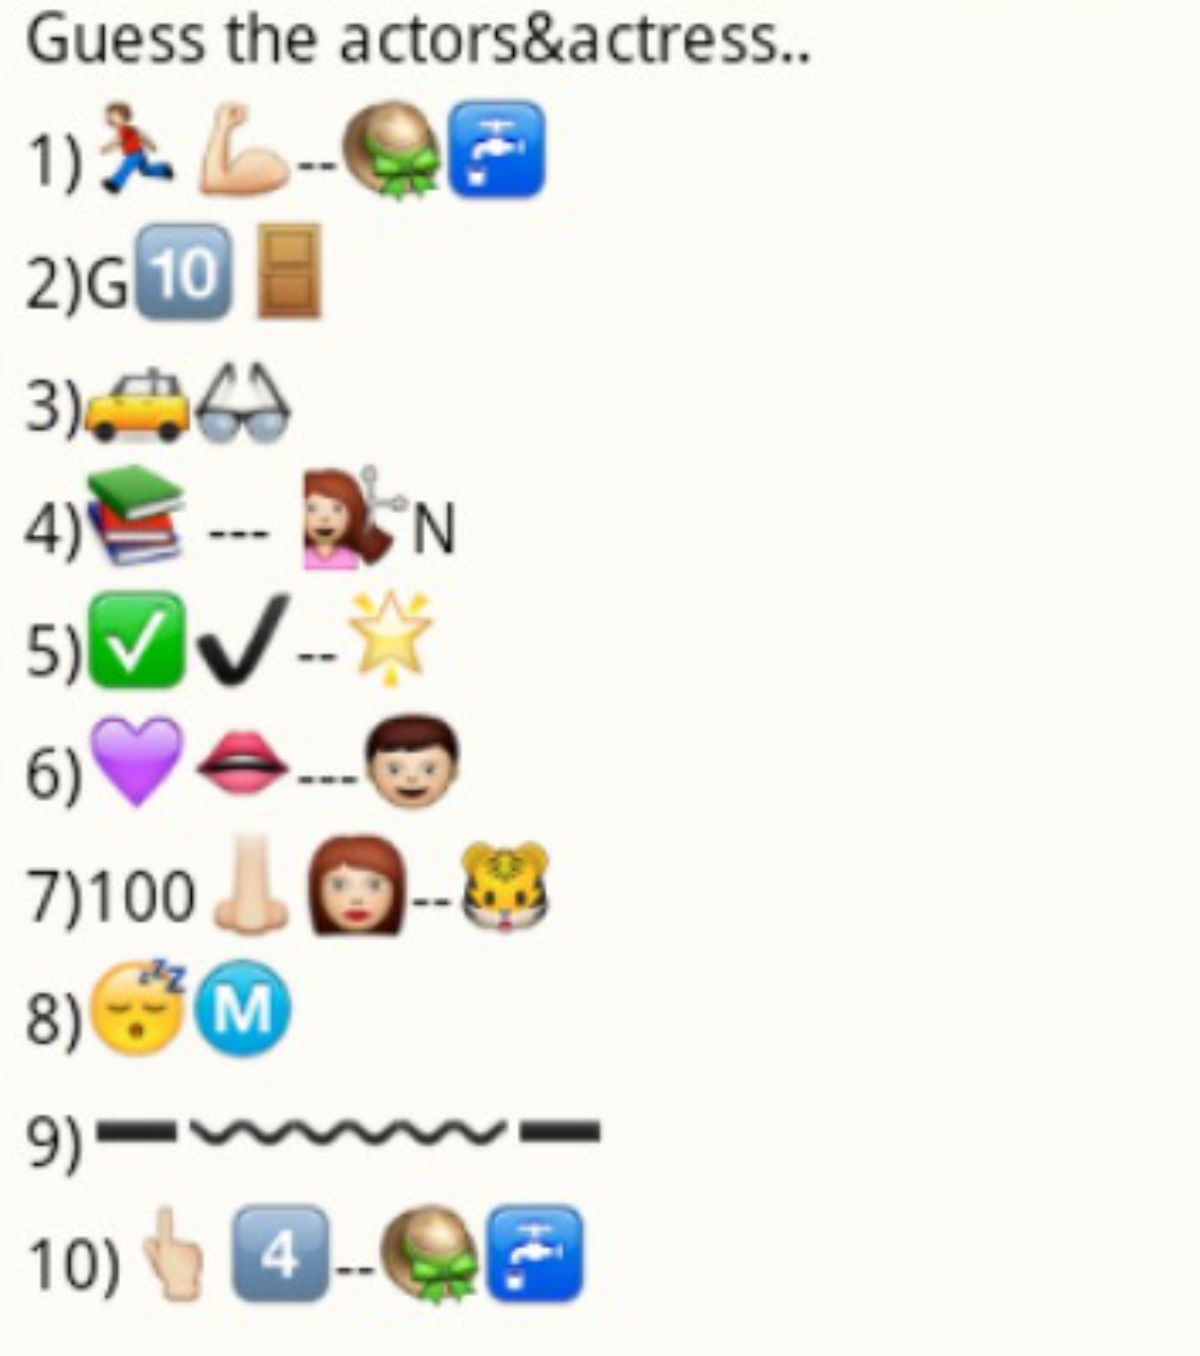 the text reads "Guess the actors and actress..." Then numbered 1 to 10 down the page are groups of emojis